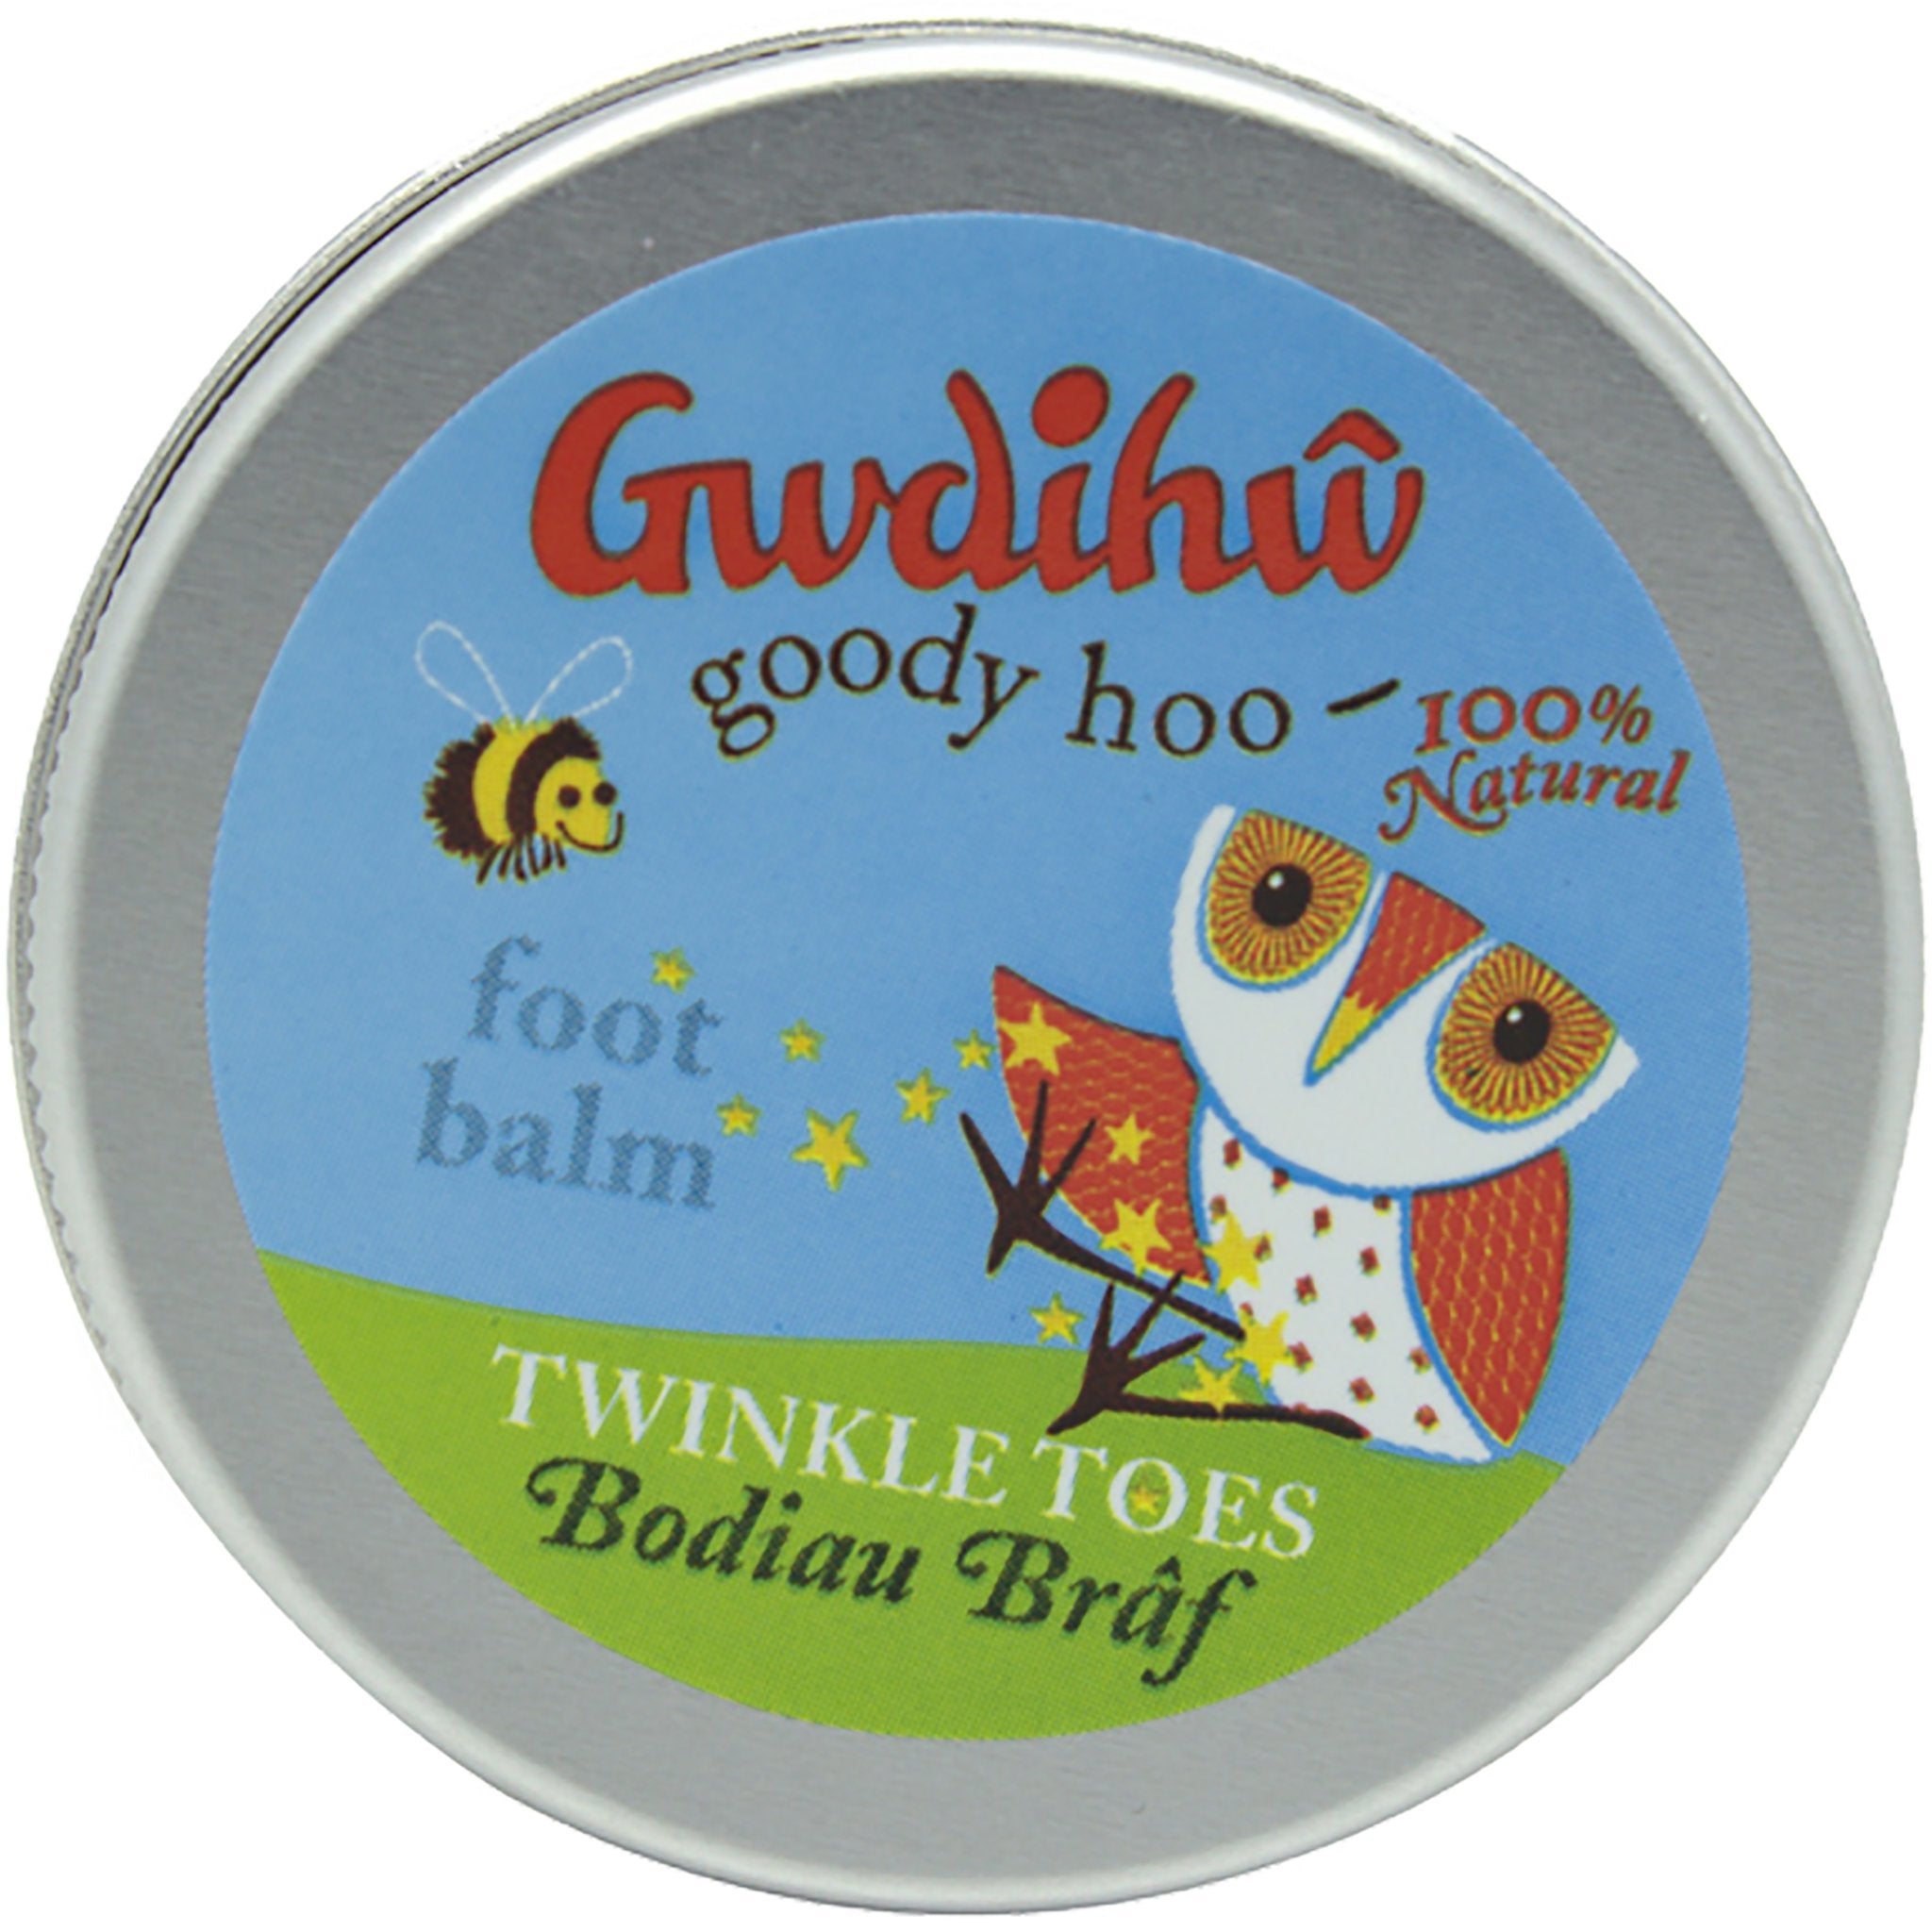 Twinkle Toes Foot Balm - mypure.co.uk